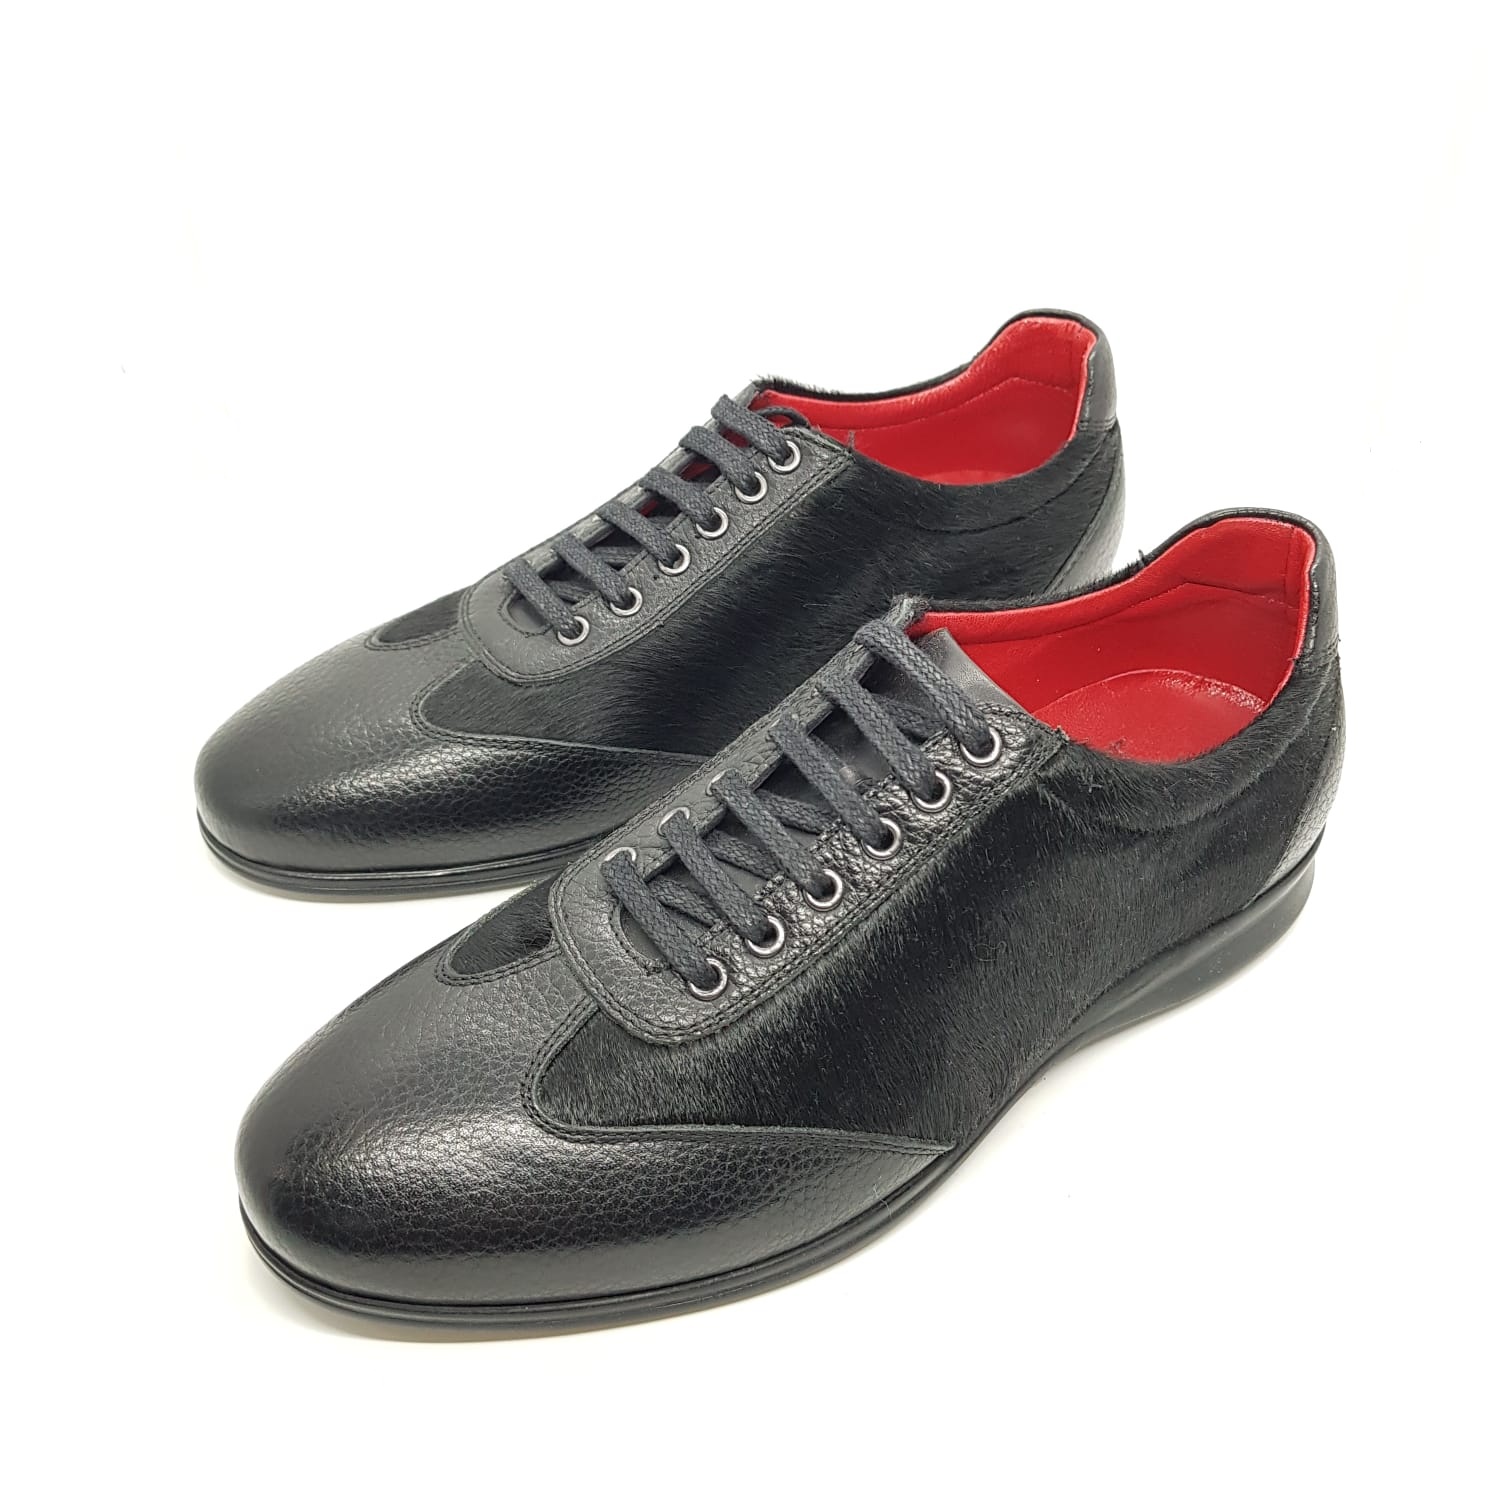 Enrico Marinelli Mens Formal Black Leather Lace-up with Short Fur Shoes ...